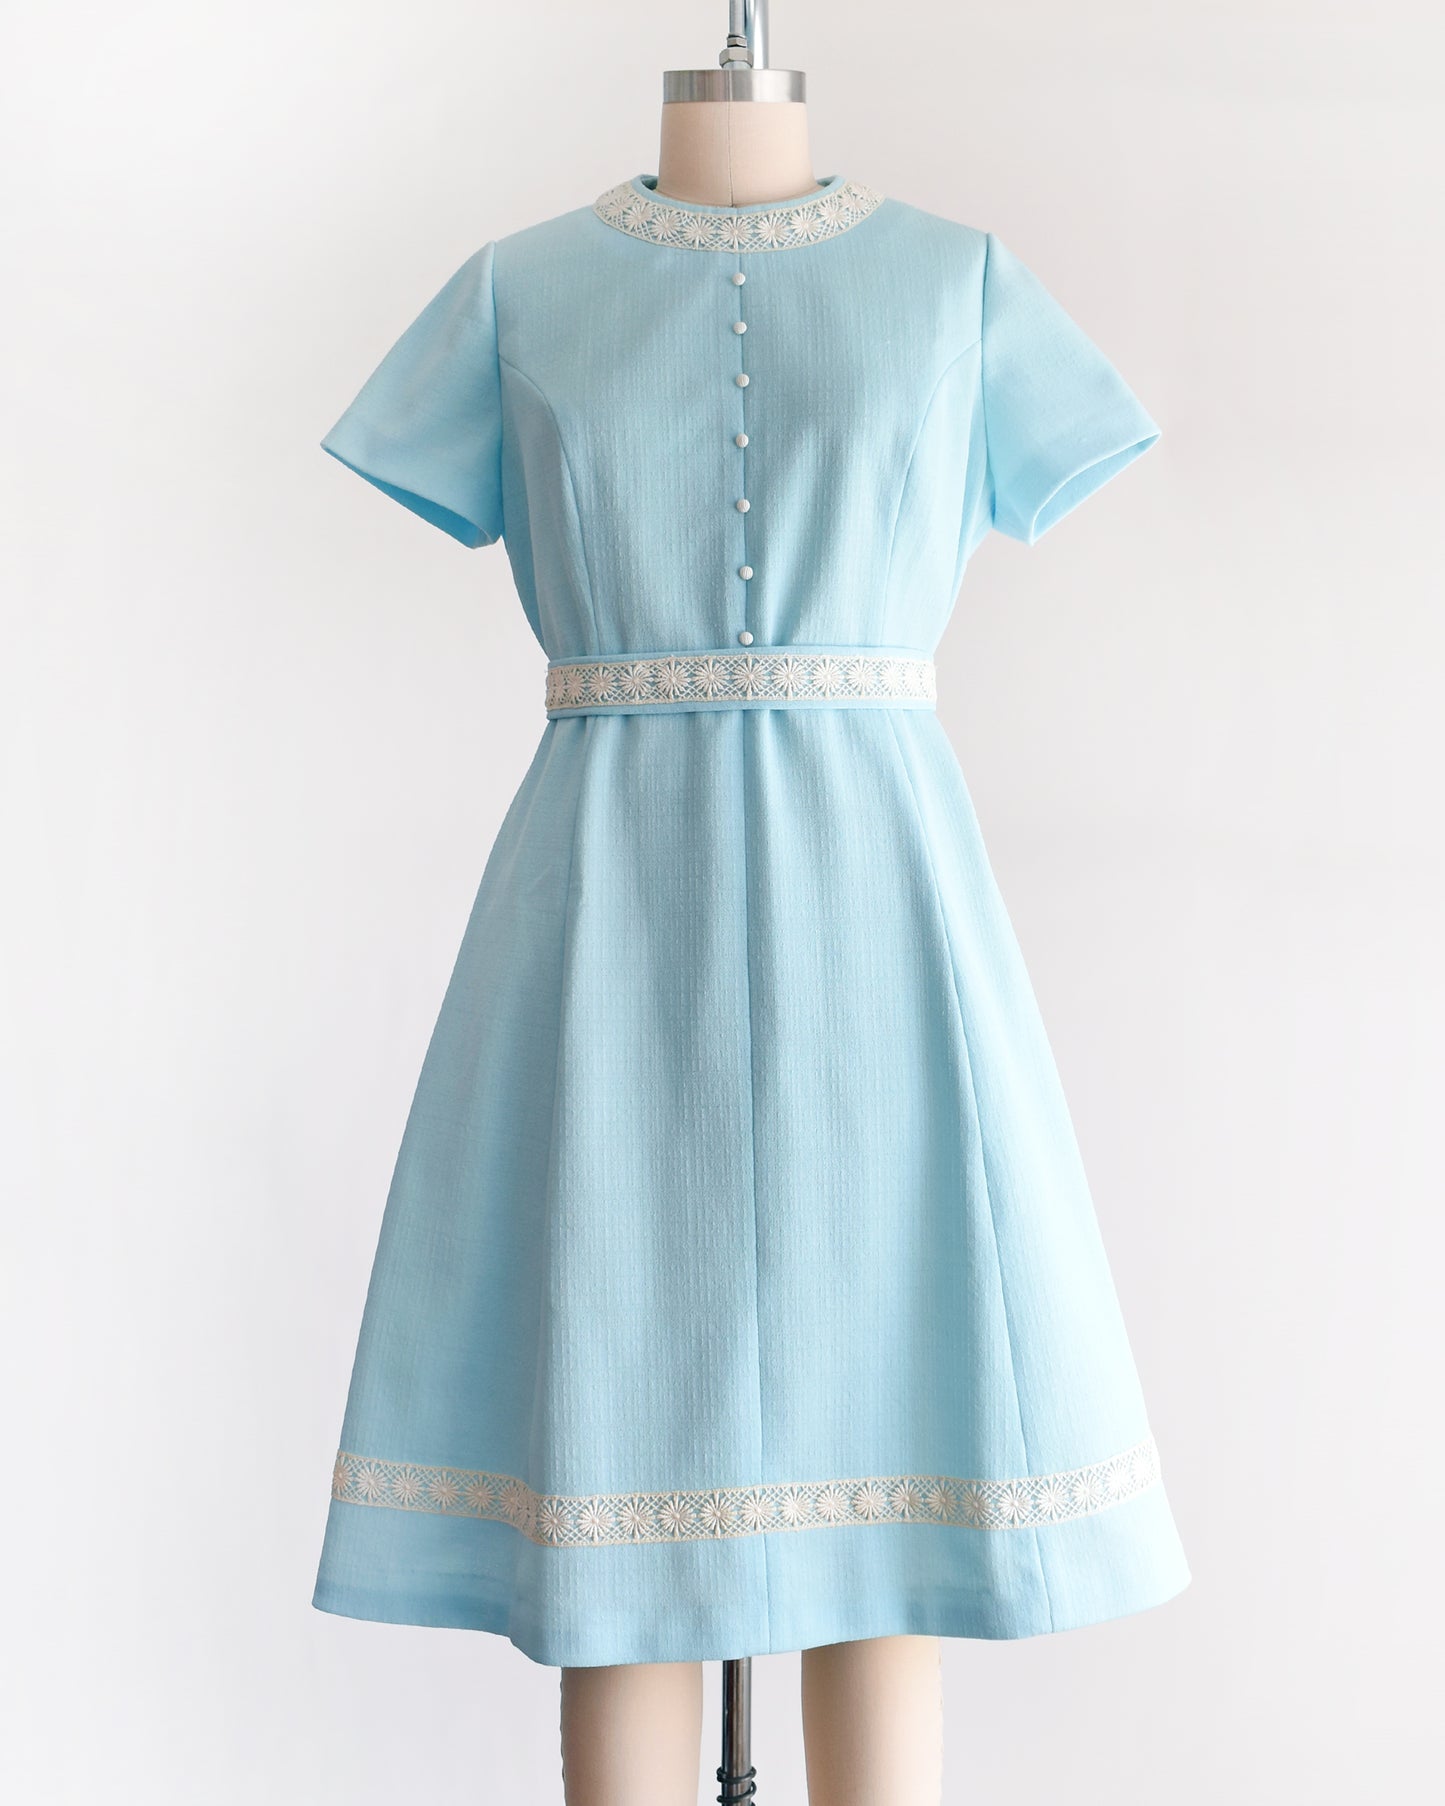 a late 1960s early 1970s vintage mod dress that is light blue and has cream floral lace trim around the collar, belt, and hem